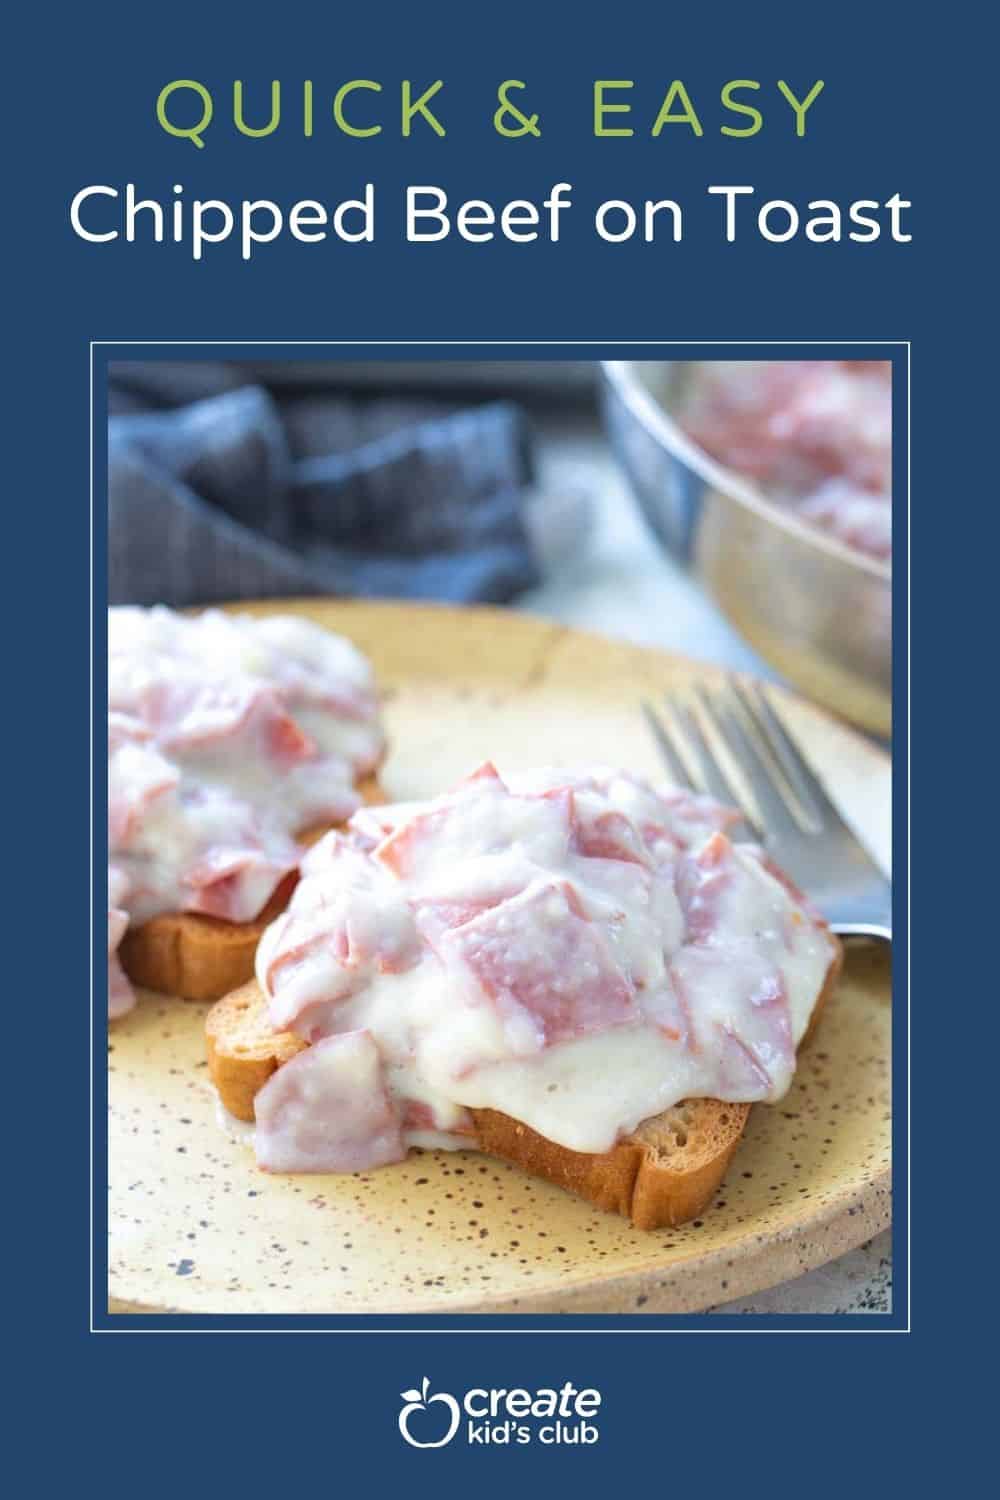 Pin of chipped beef on toast.